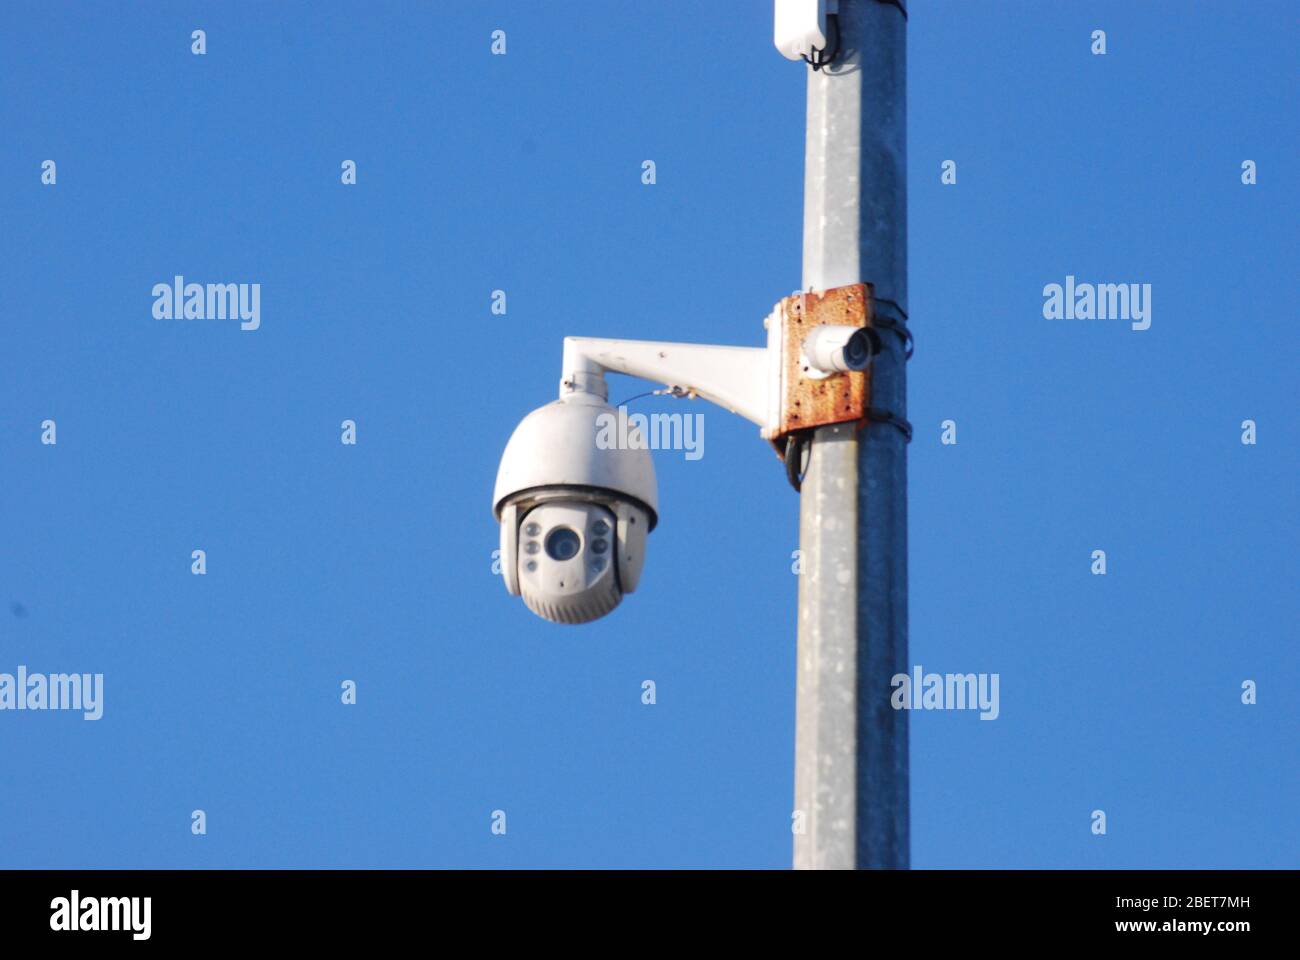 CCTV Camera on Pole, Bantry, West Cork, Ireland with copy space Stock Photo